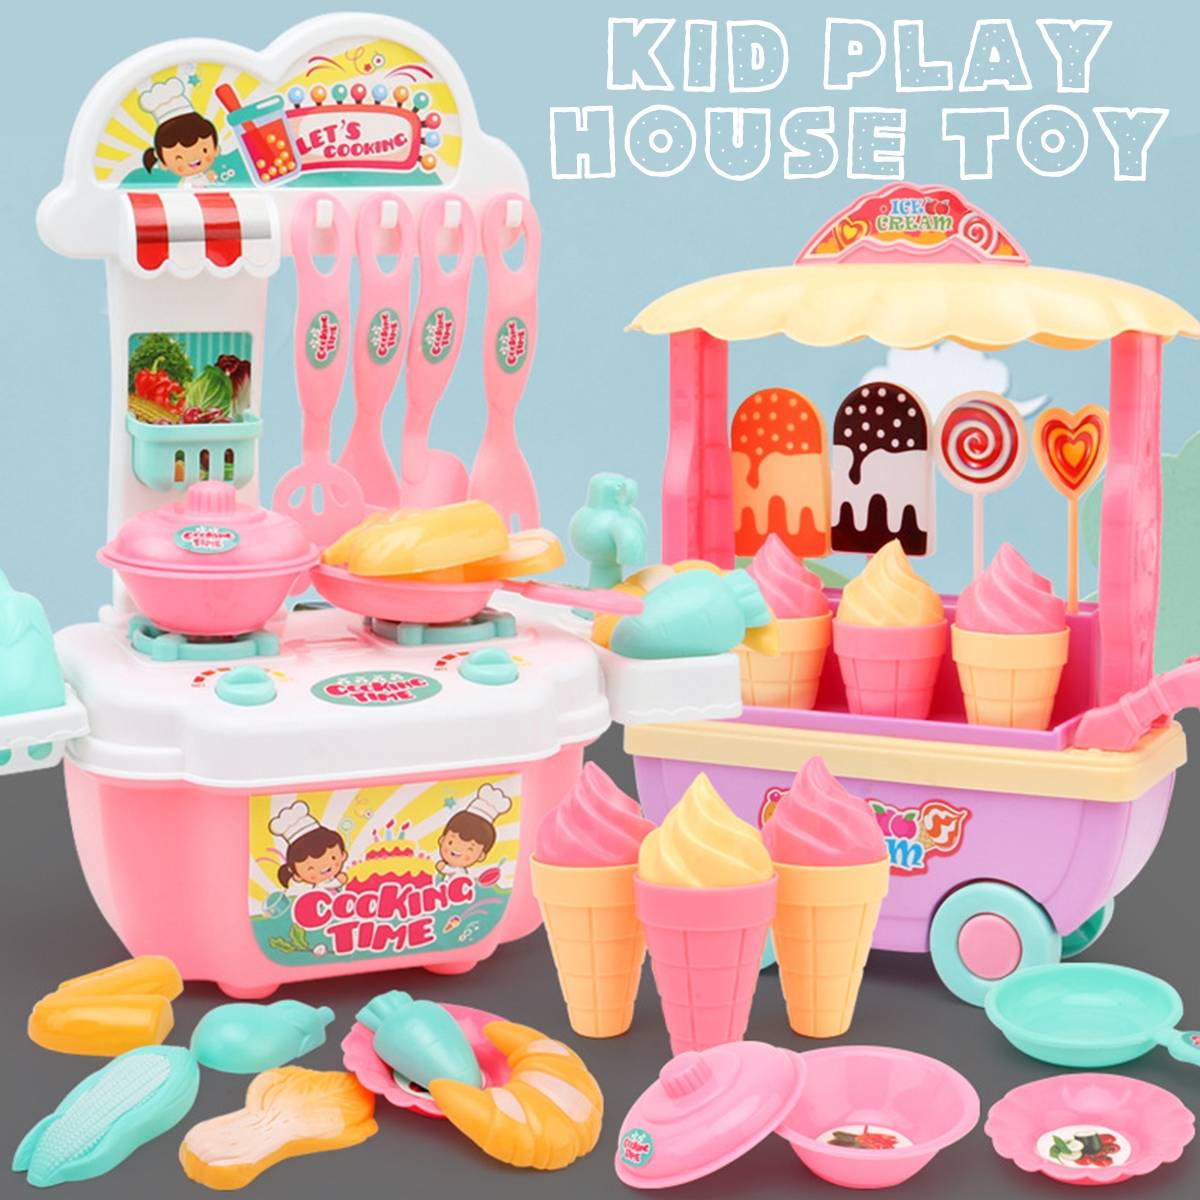 Kid Play House Toy Kitchen Cooking Pots Pans Food Dishes Cookware Toys